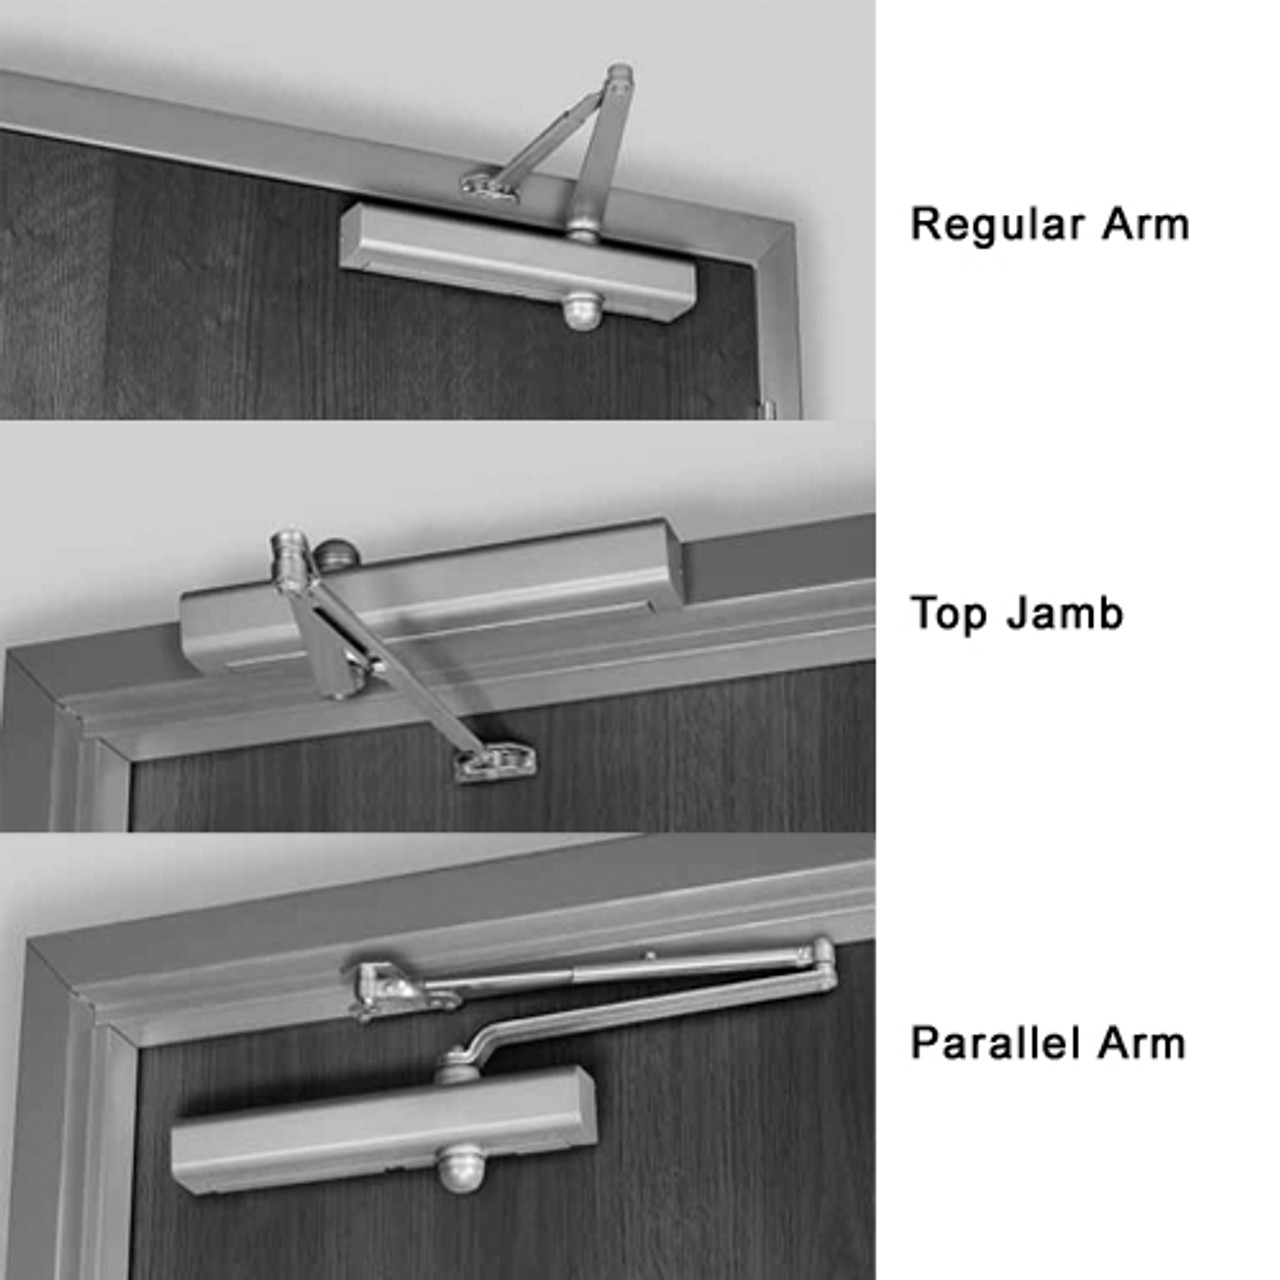 8501-691 Norton 8000 Series Full Cover Non-Hold Open Door Closers with Regular Parallel and Top Jamb to 3 inch Reveal in Dull Bronze Finish